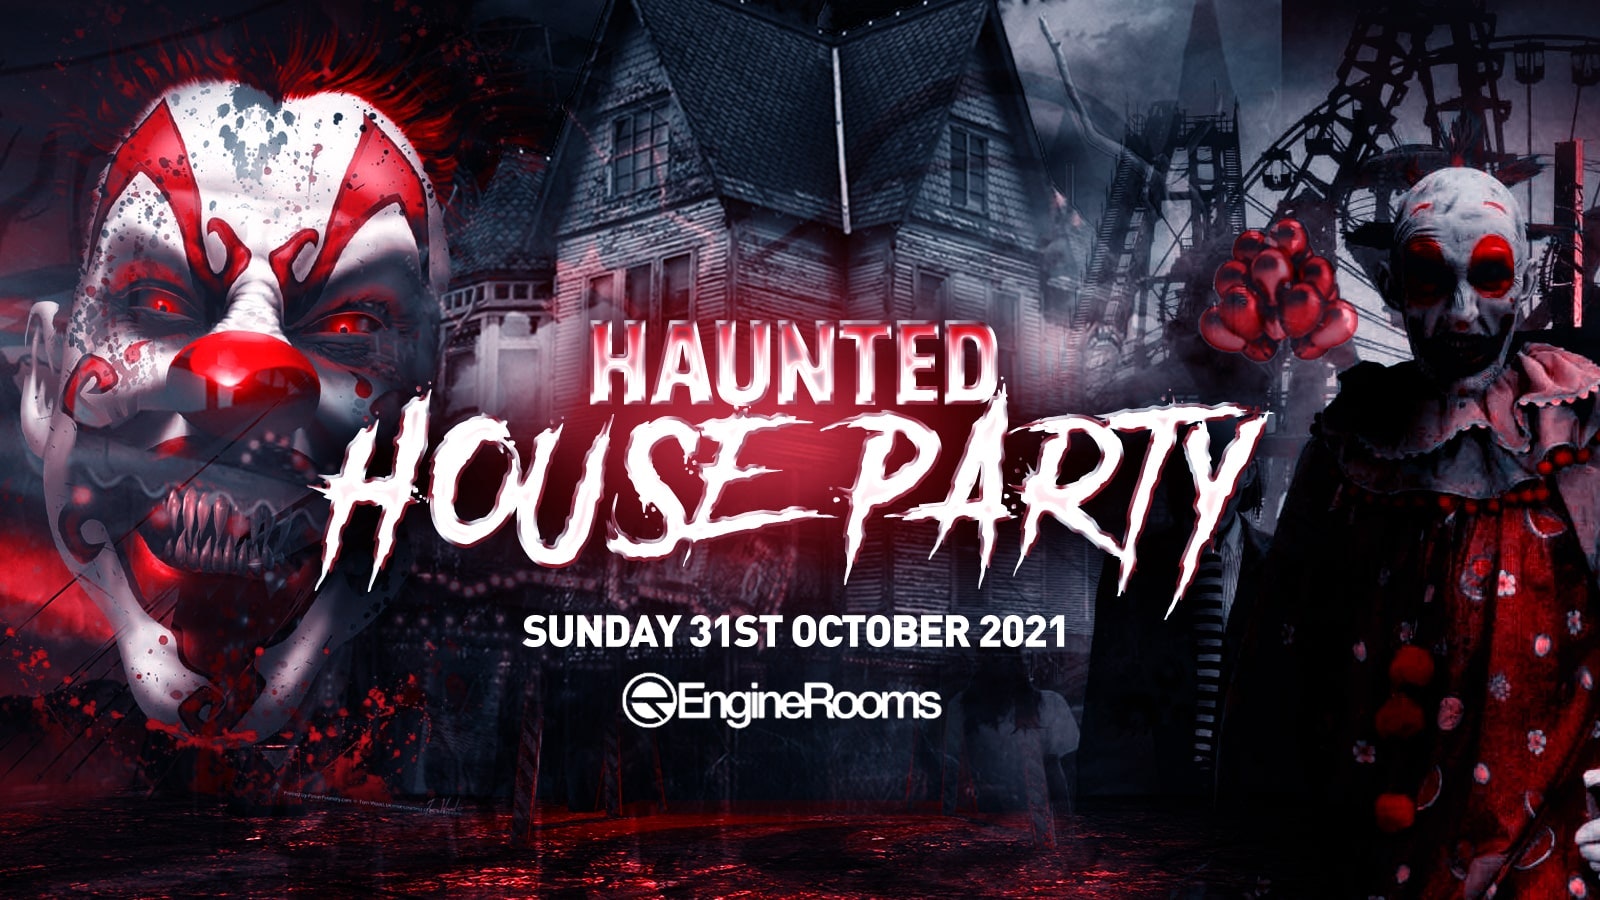 The Haunted House Party | Southampton Halloween 2021 – UNDER 100 TICKETS REMAINING!